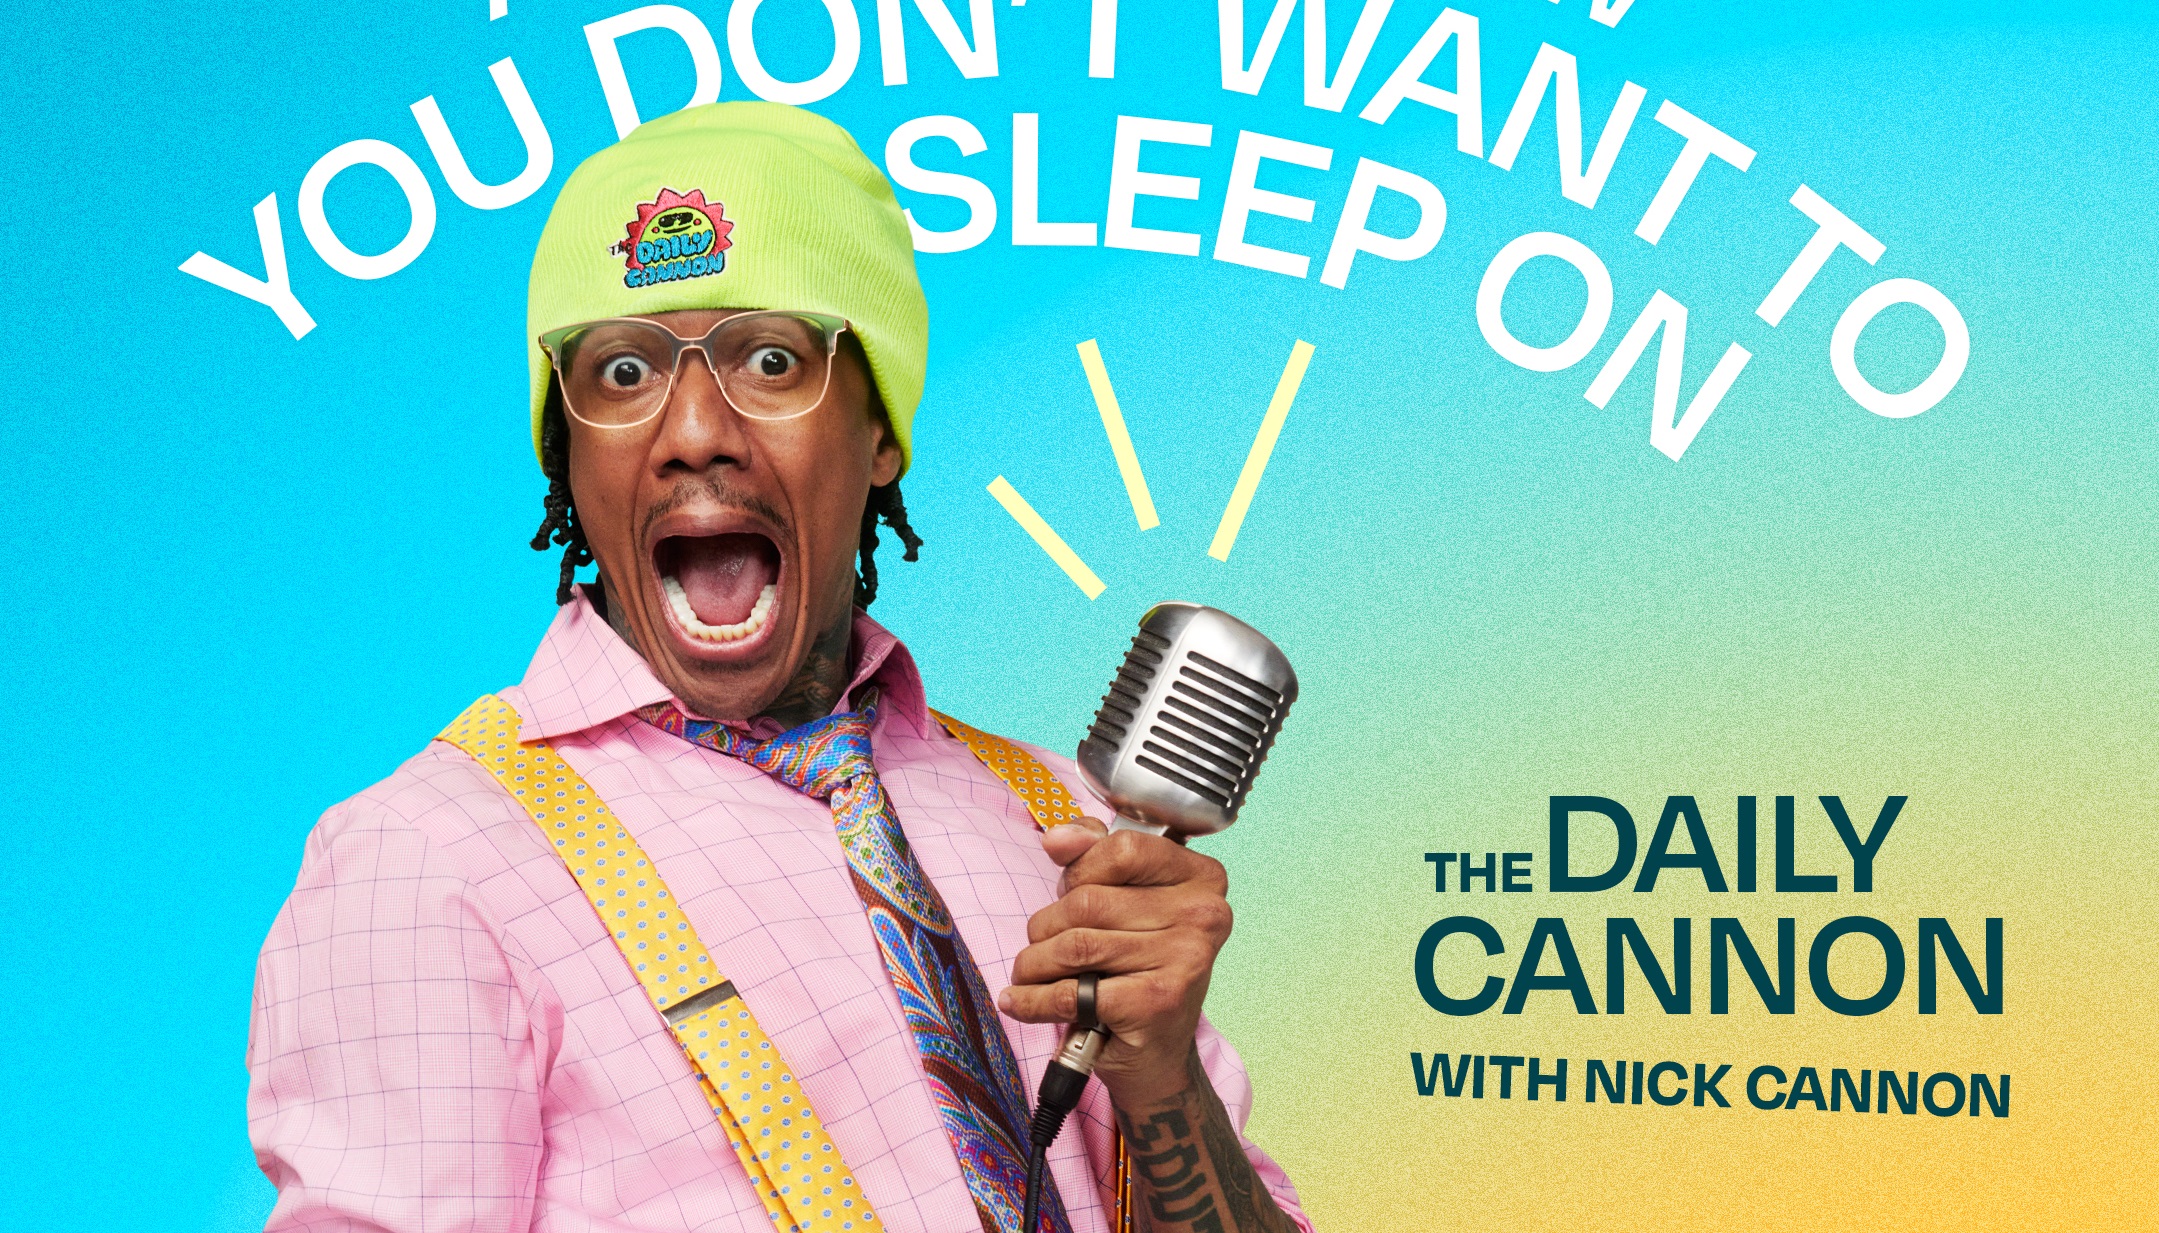 Nick Cannon Set to Host New Radio Show ‘The Daily Cannon’ on Amp